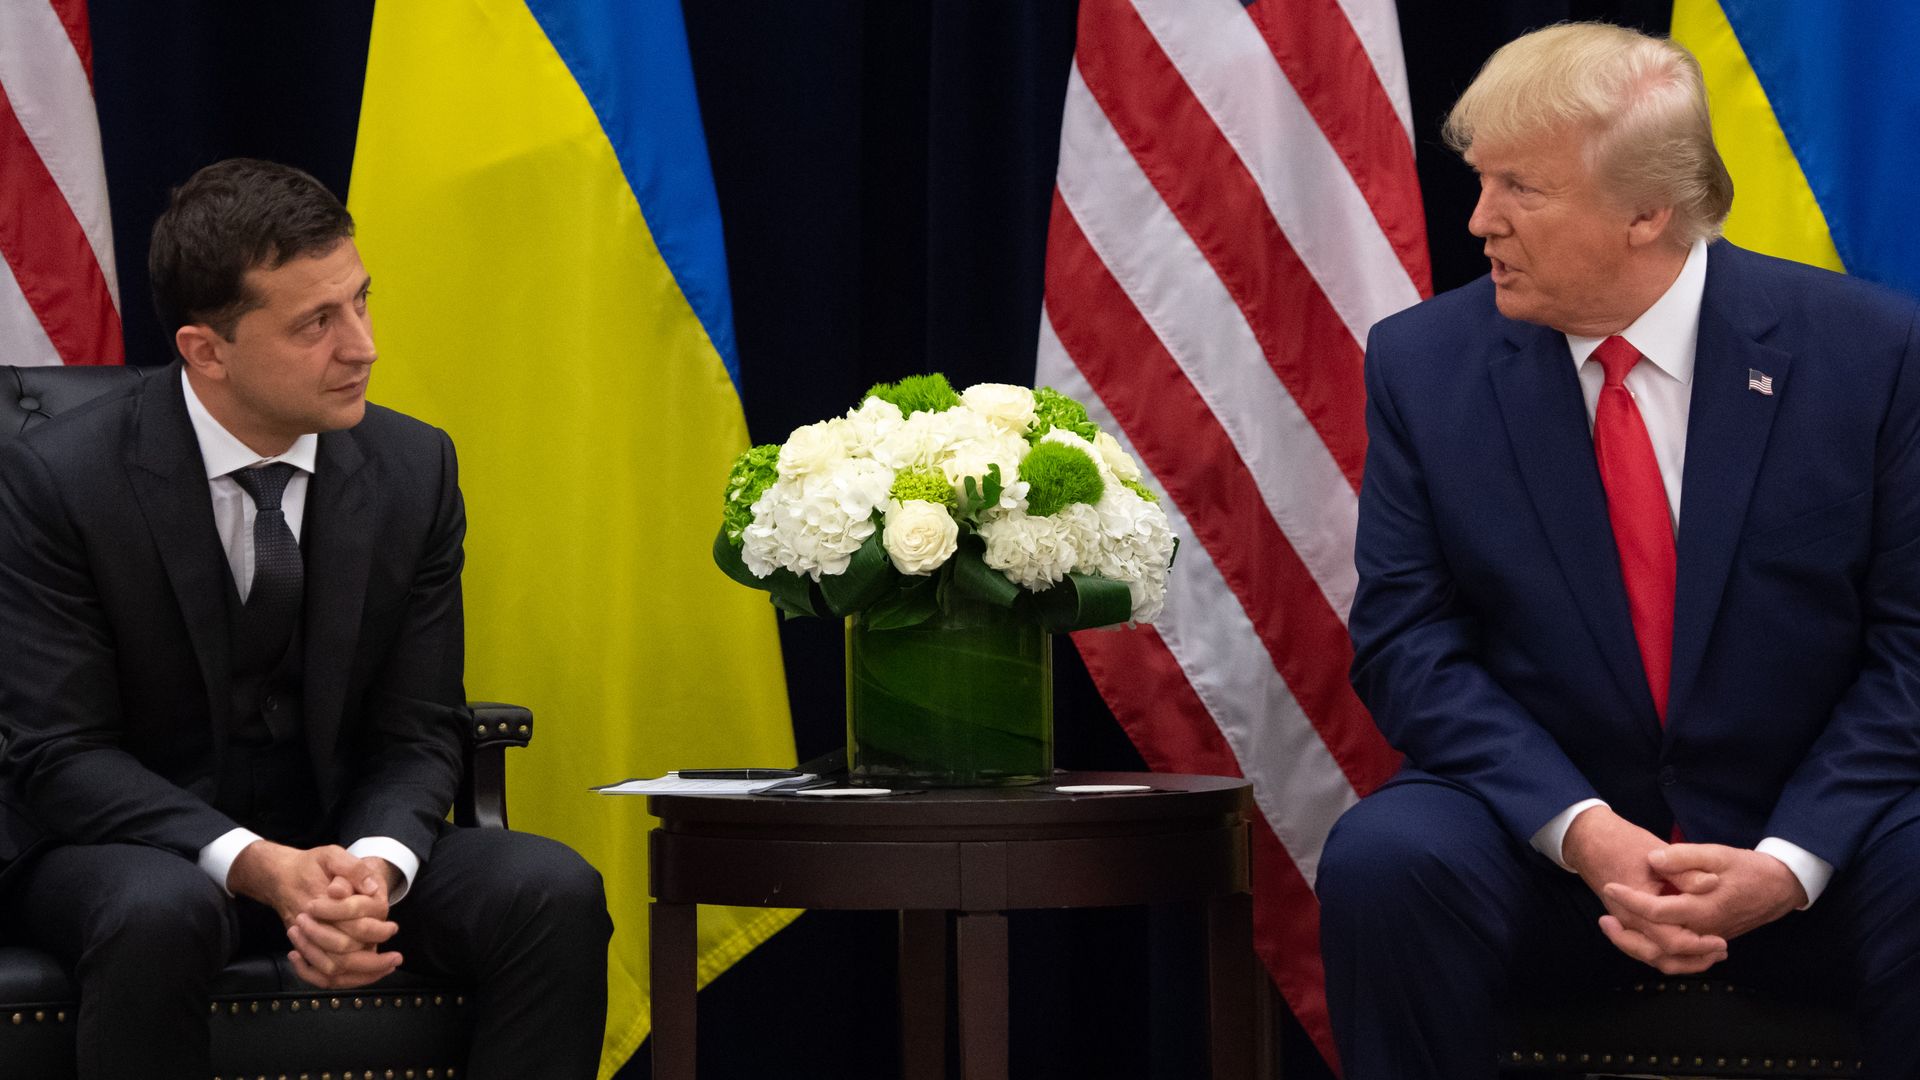 In this image, Zelensky and Trump sit across from each other.